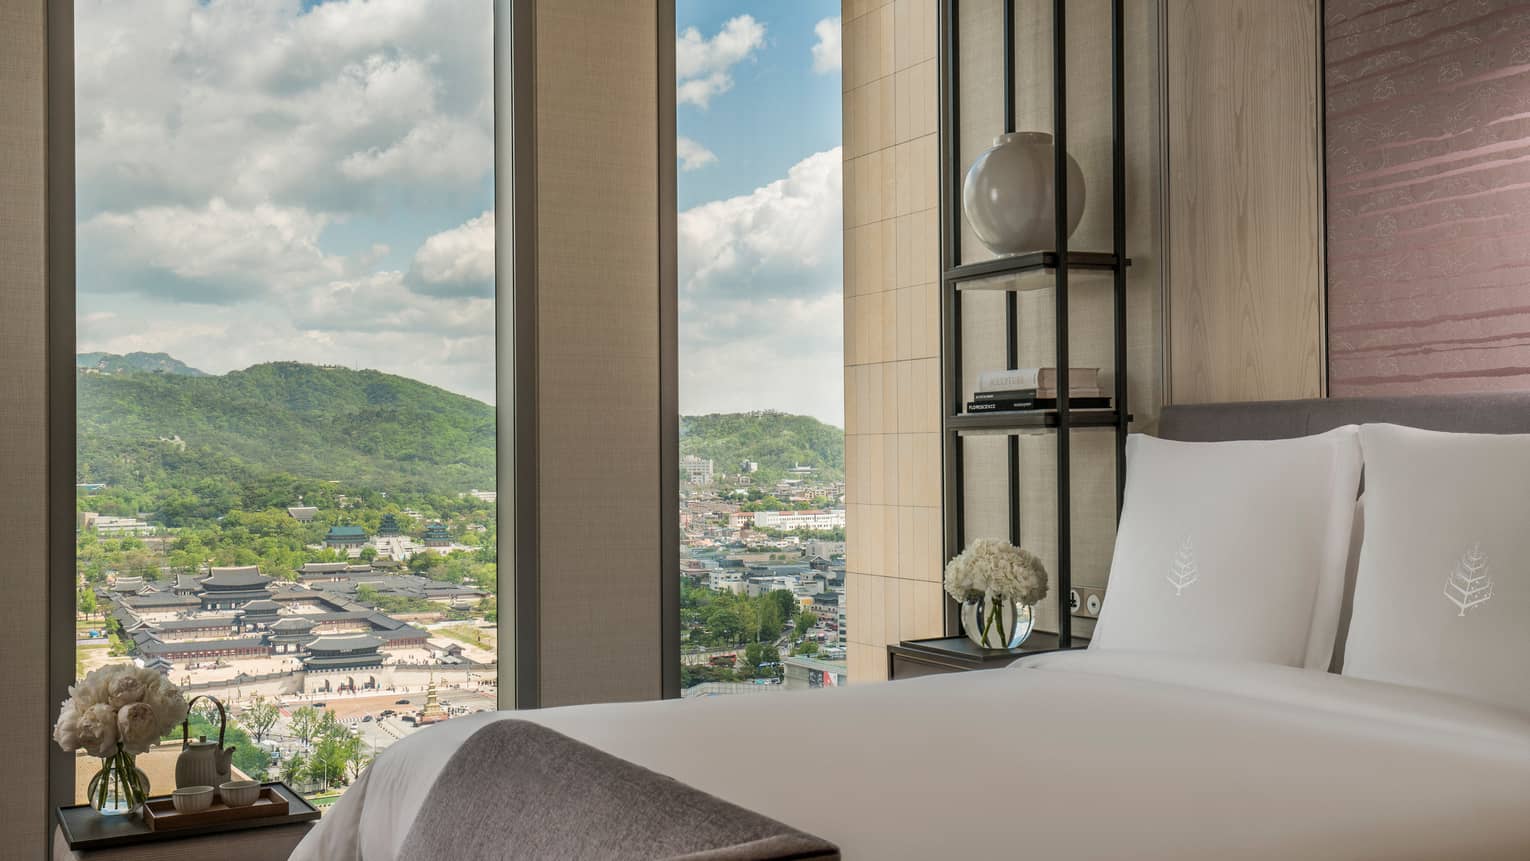 Palace-View Executive Suite bed, chaise at foot, shelf with vases, books beside window overlooking Gyeongbokgung Palace